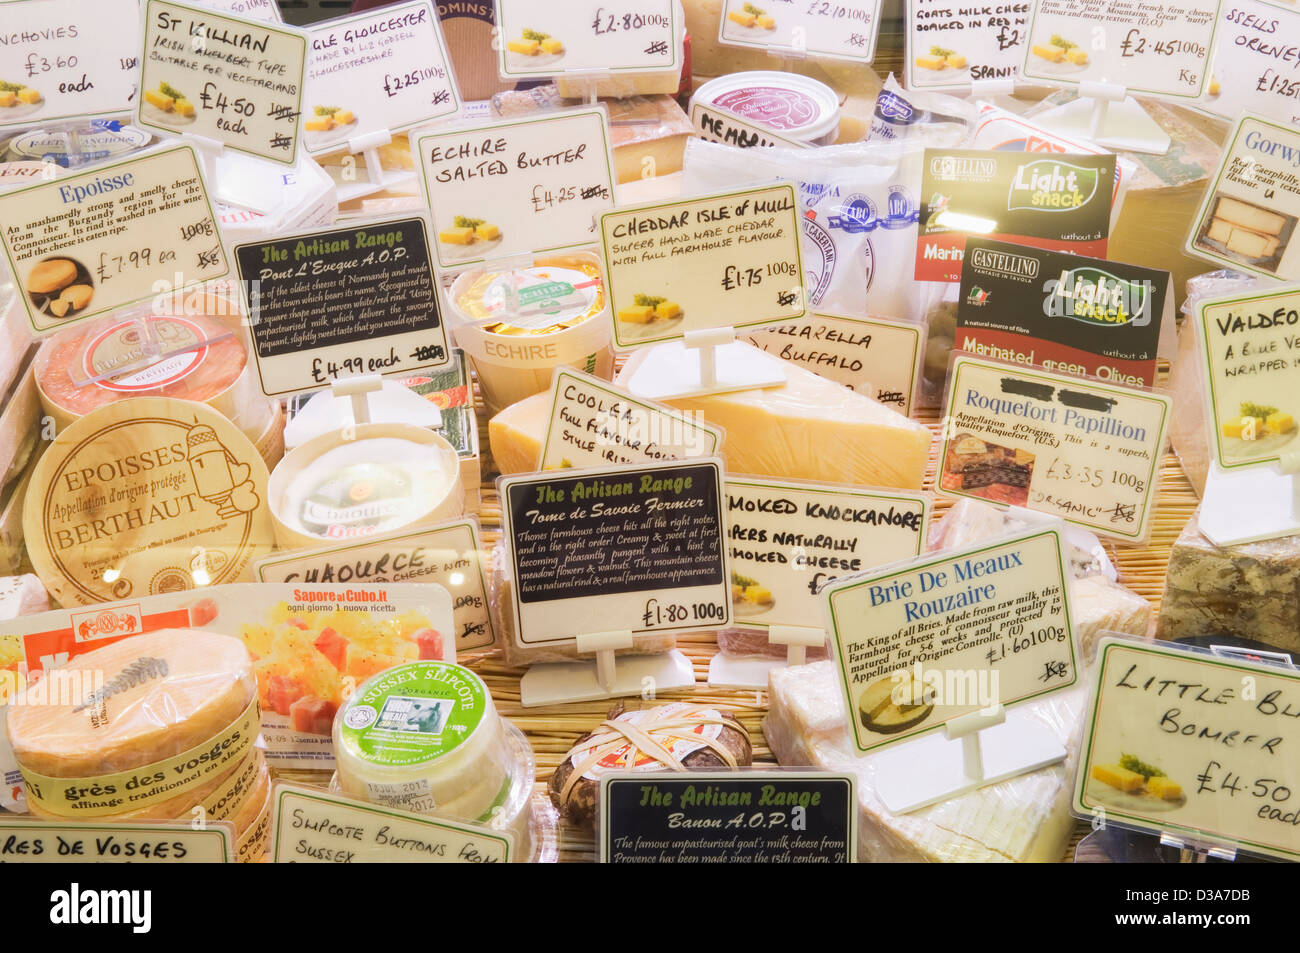 Selection of cheeses at a delicatessen counter. Stock Photo